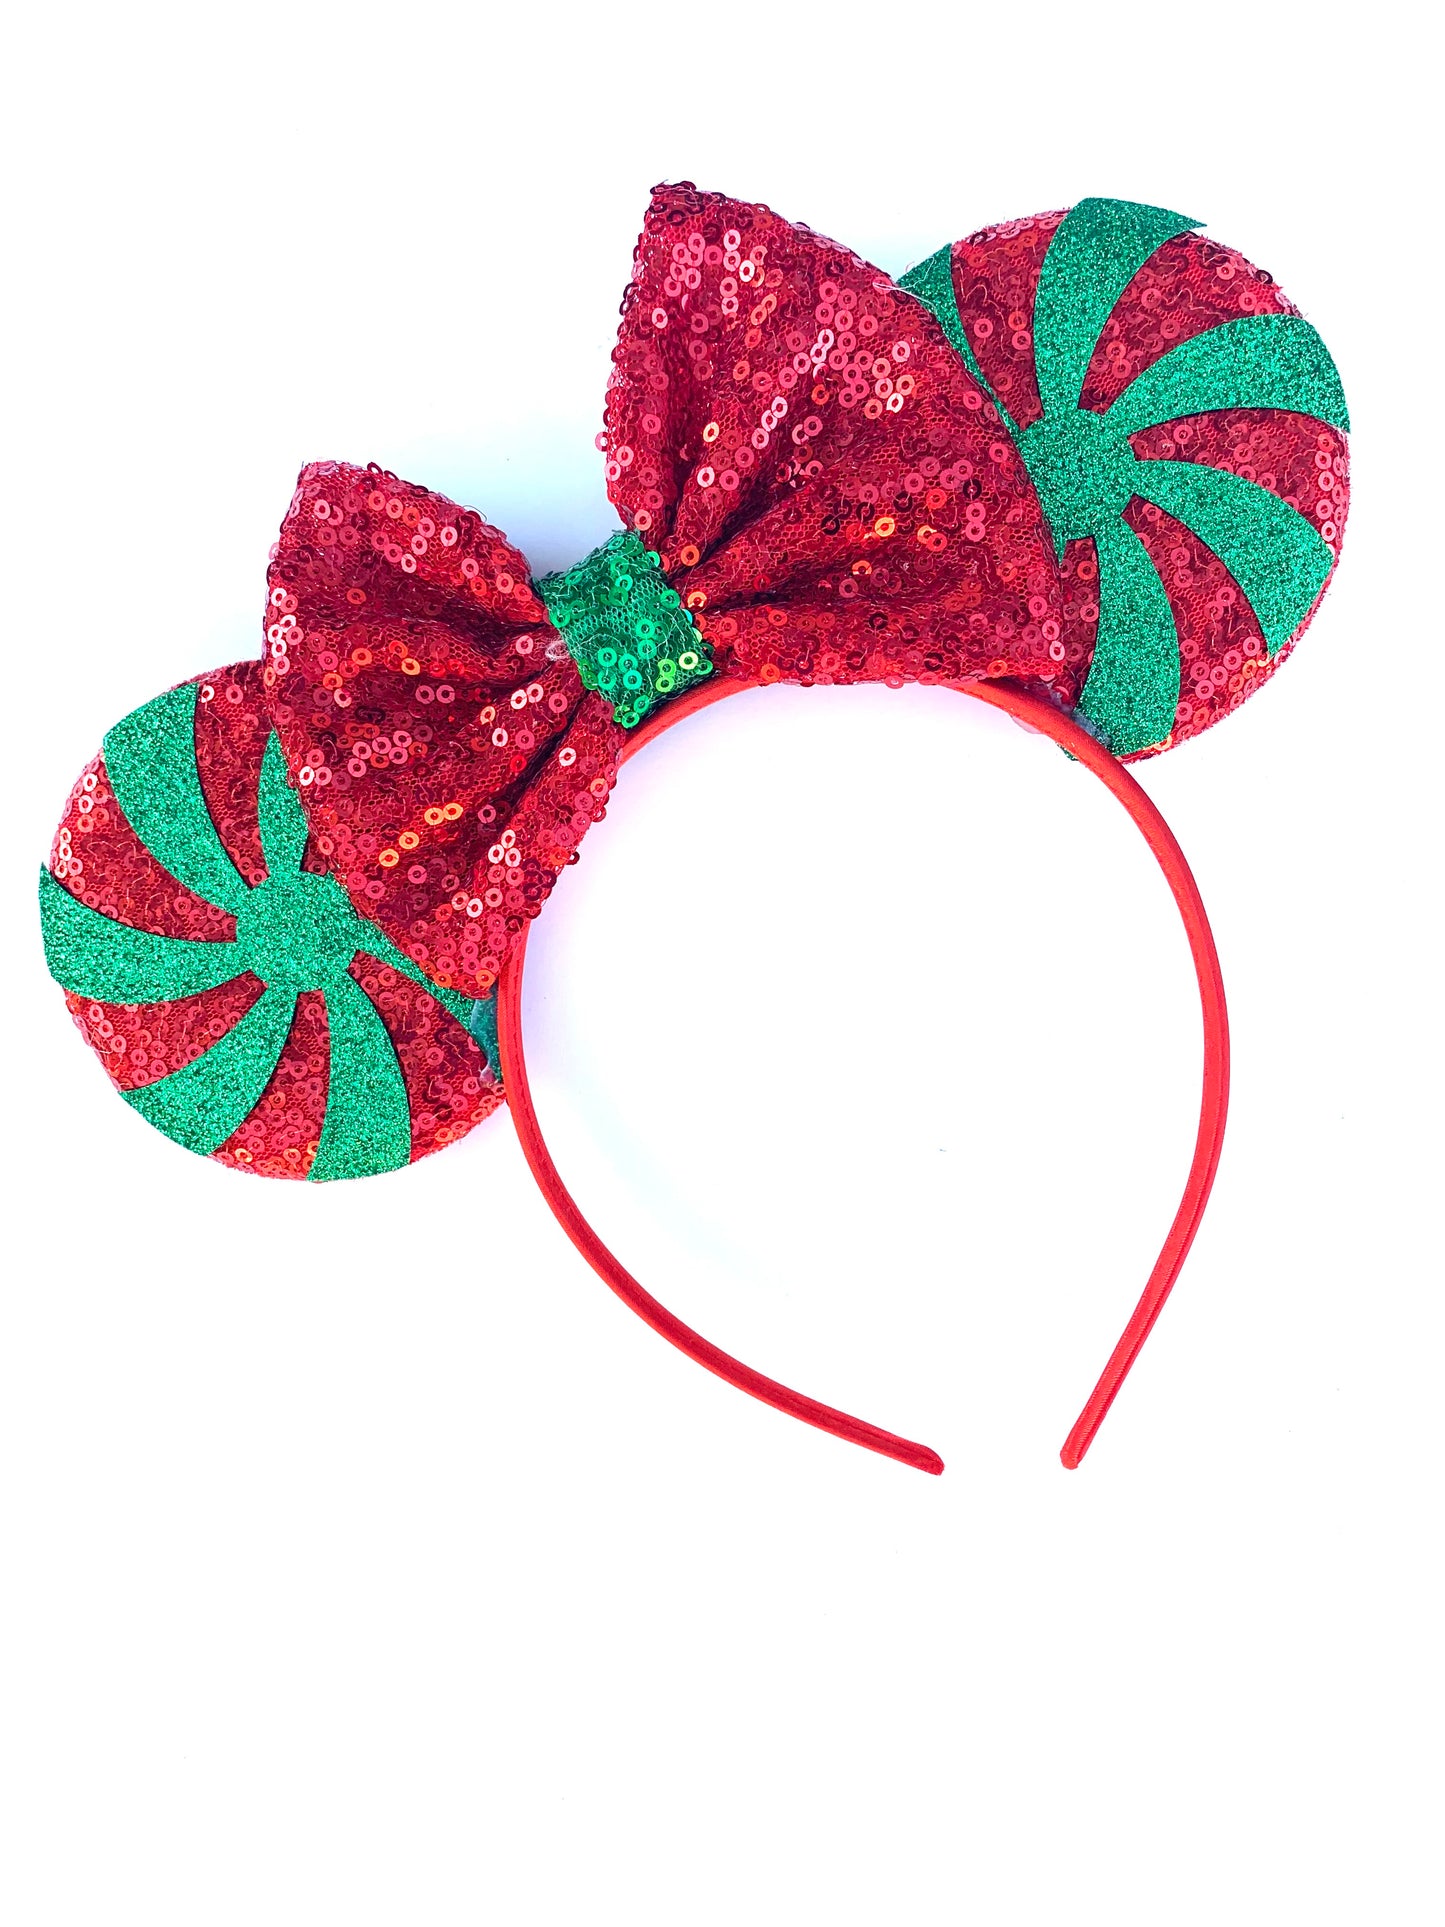 Candy cane mouse ears